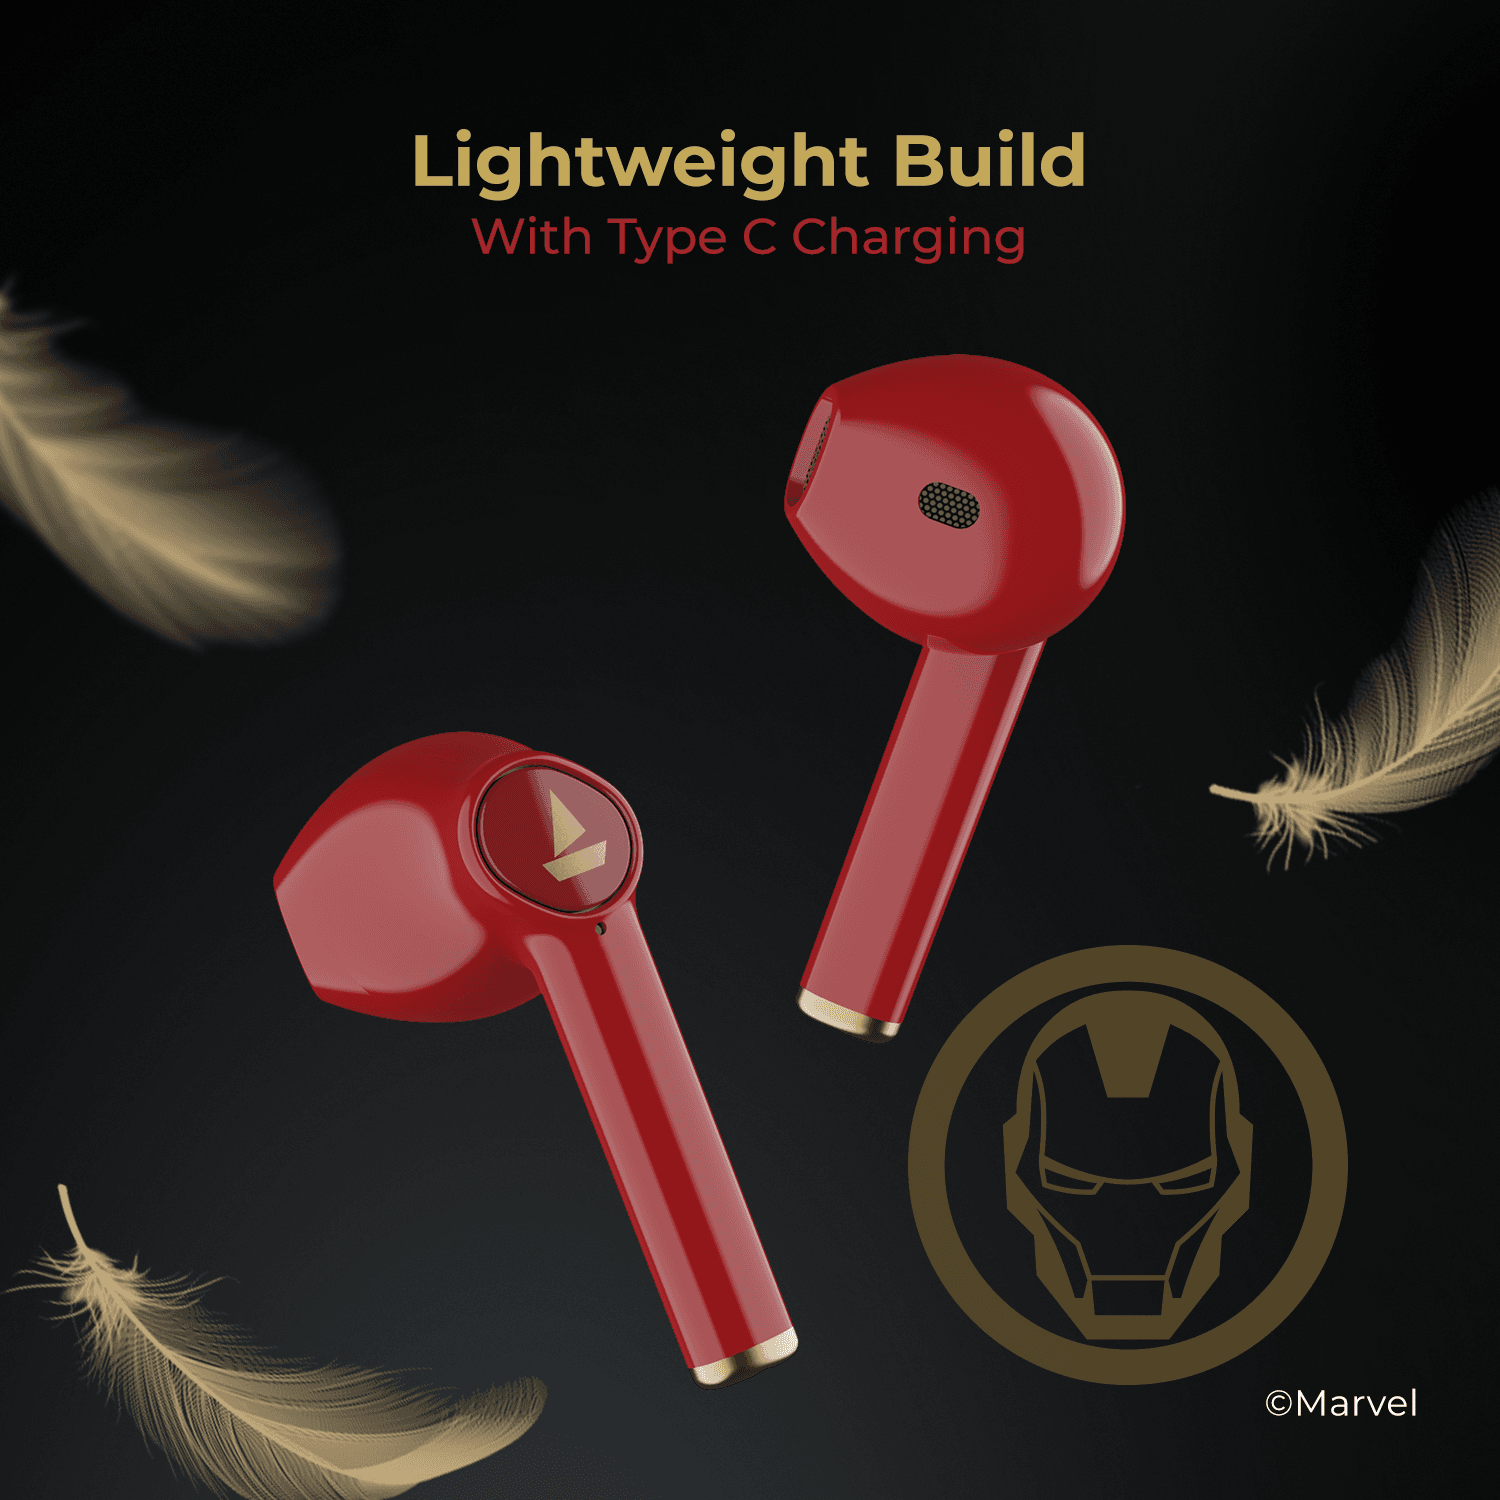 boAt Airdopes 131 Iron Man Marvel Edition | Wireless Earbuds with 13mm Audio Drivers, Upto 15 Hours Playback, IWP Technology, Voice Assistant, Type C Charging